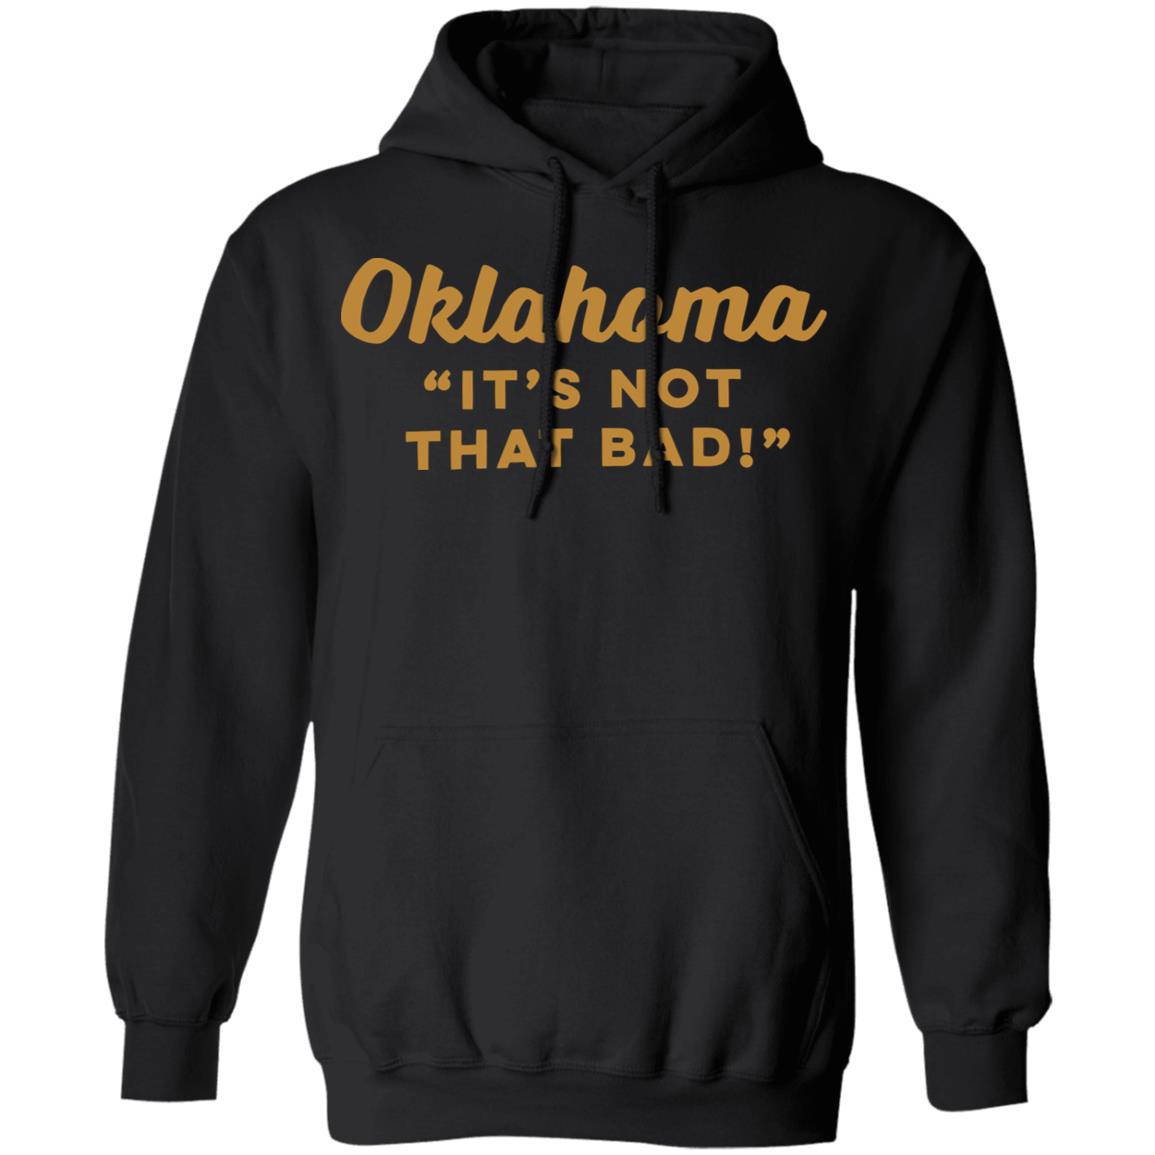 Oklahoma Is Not That Bad Shirt 1